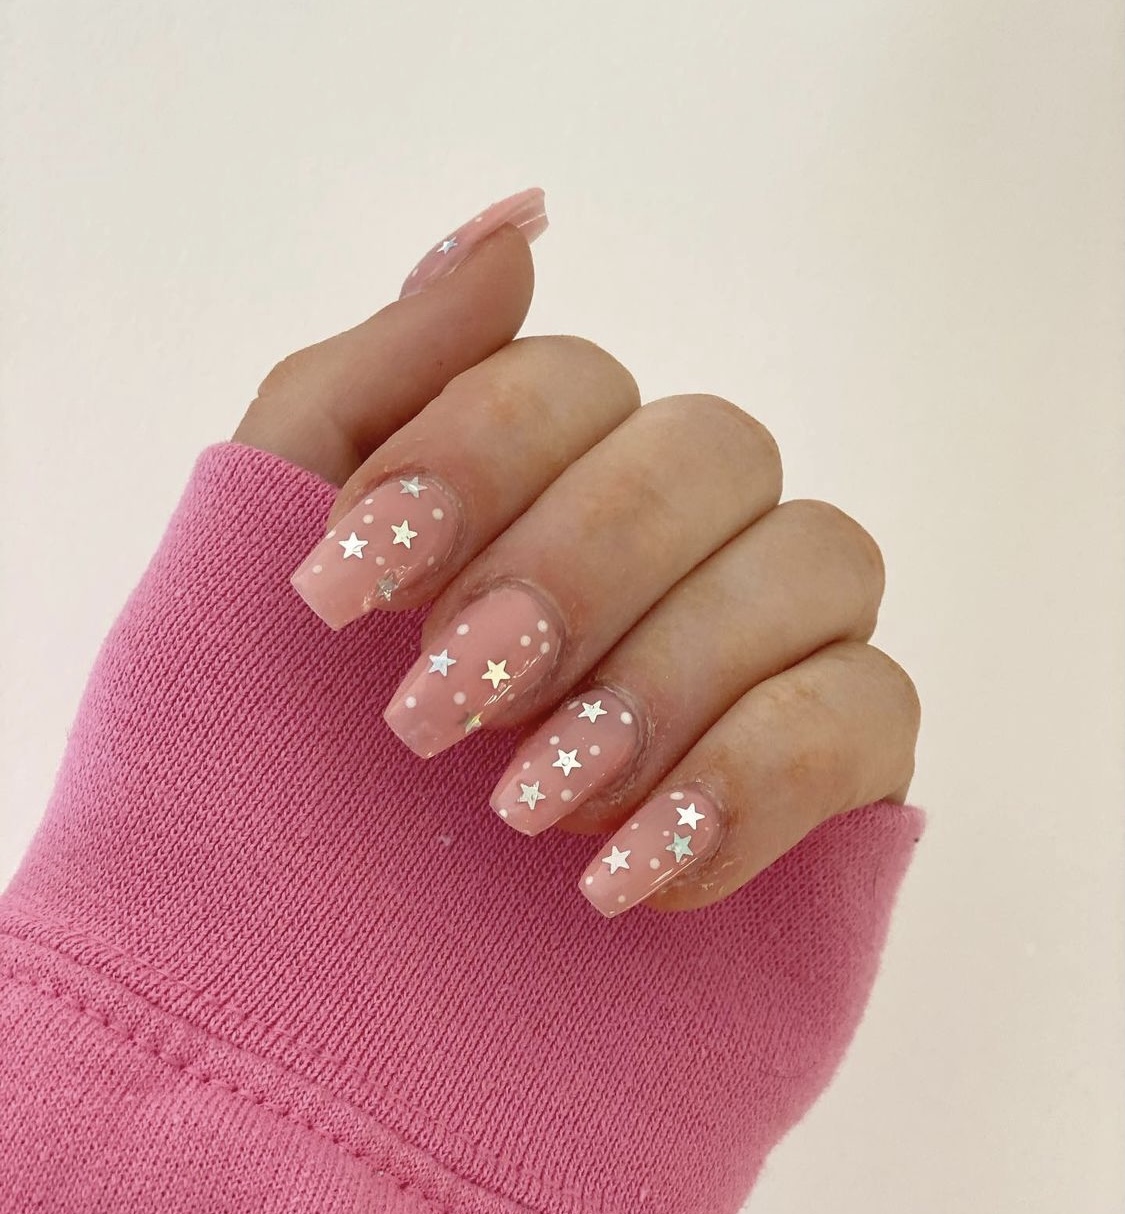 Acrylic nail extensions with stars